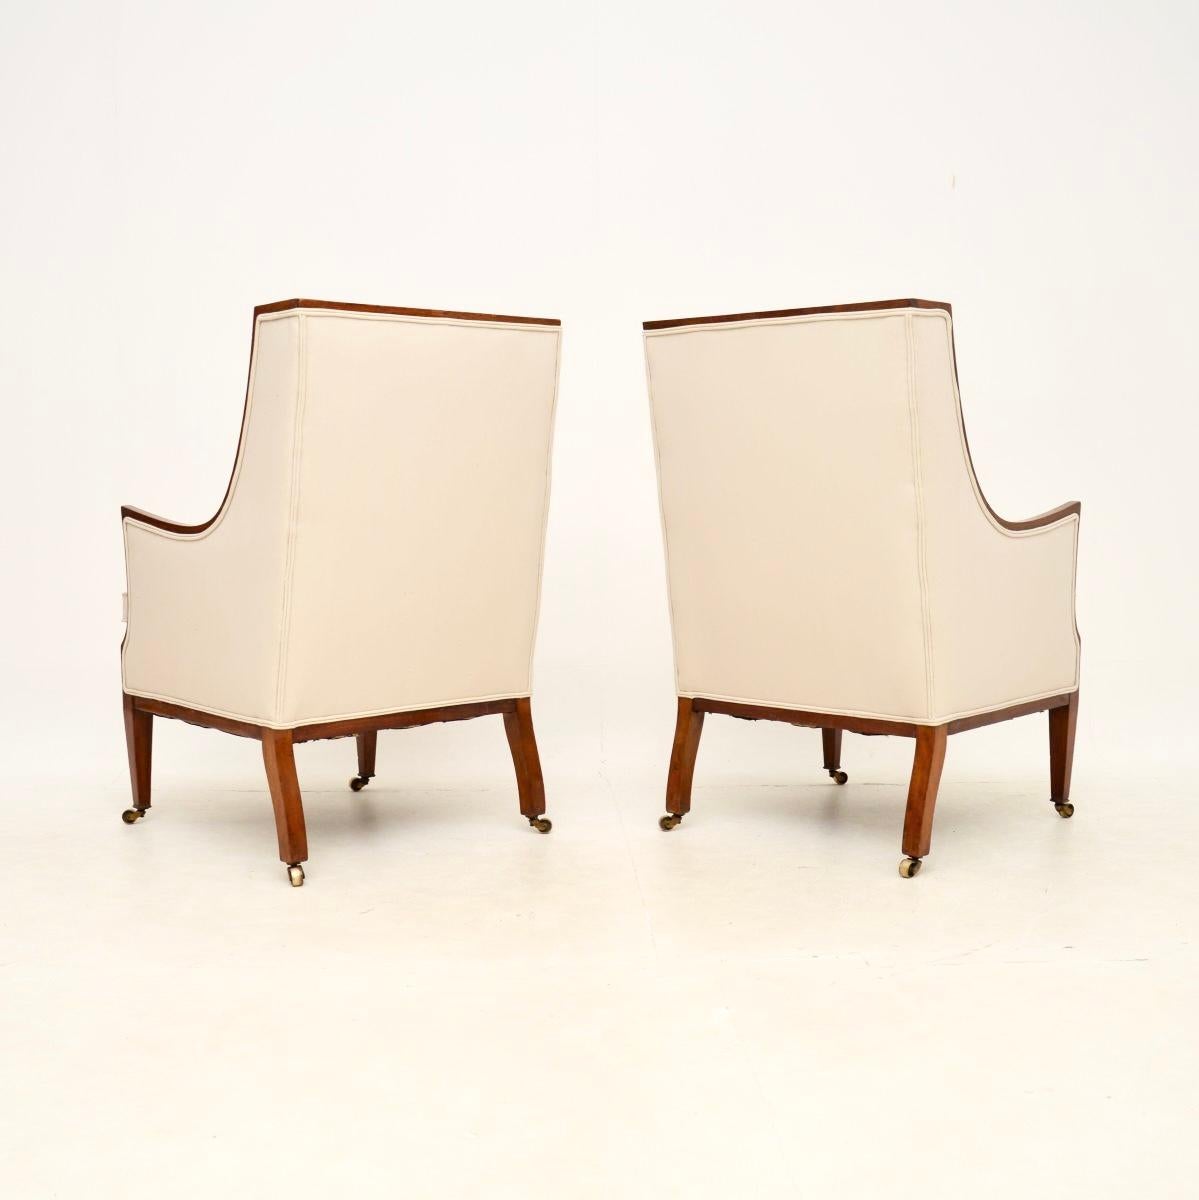 Early 20th Century Pair of Antique Edwardian Armchairs For Sale